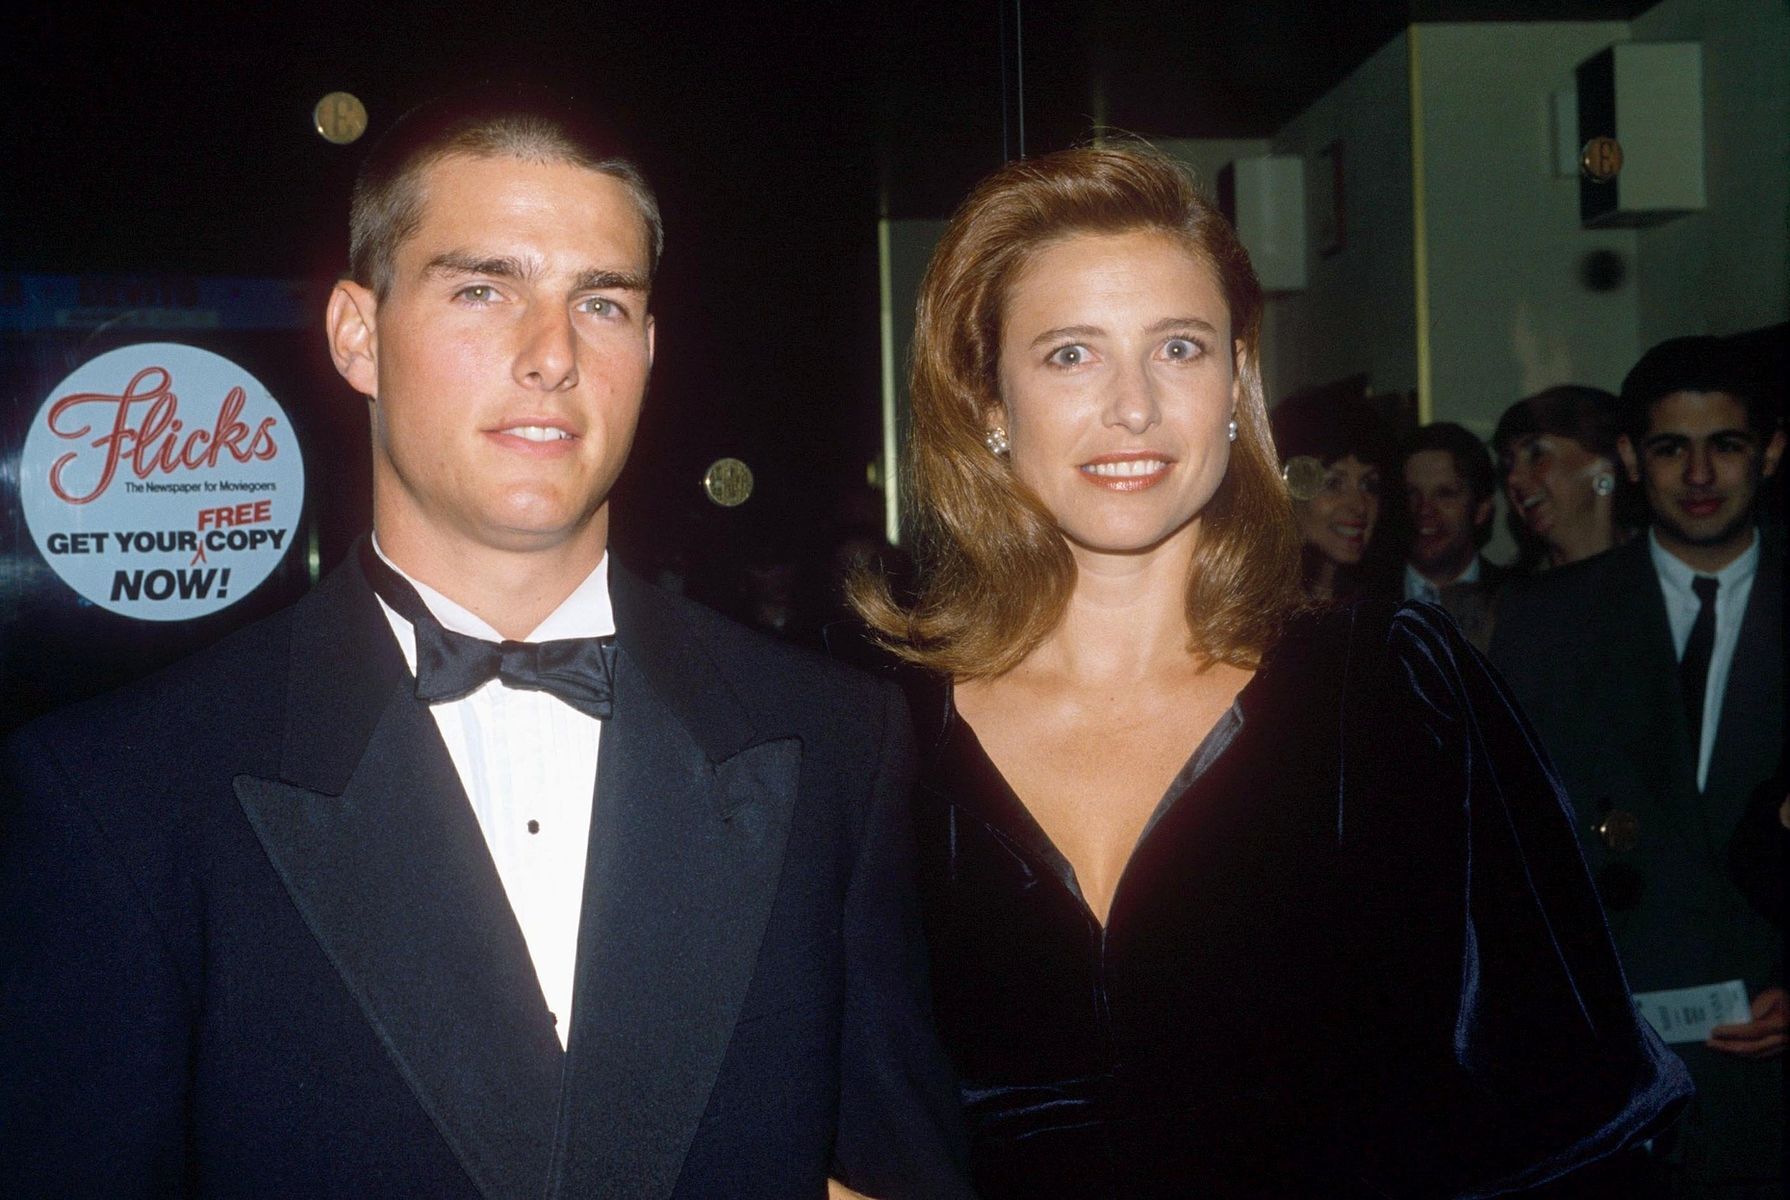 <p>In 1986, Cruise told <a href="https://www.rollingstone.com/movies/movie-news/tom-cruise-winging-it-2-190433/"><em>Rolling Stone</em></a> he’d met <a href="https://www.imdb.com/name/nm0000211/bio">Mimi Rogers</a> at a dinner party while filming <em>Top Gun, </em>adding she was “extremely bright.” <a href="https://www.sun-sentinel.com/news/fl-xpm-1987-10-19-8703200687-story.html">Rogers went on to recall</a> how they were introduced by a mutual friend. The pair began dating, and within a year they were married. </p>